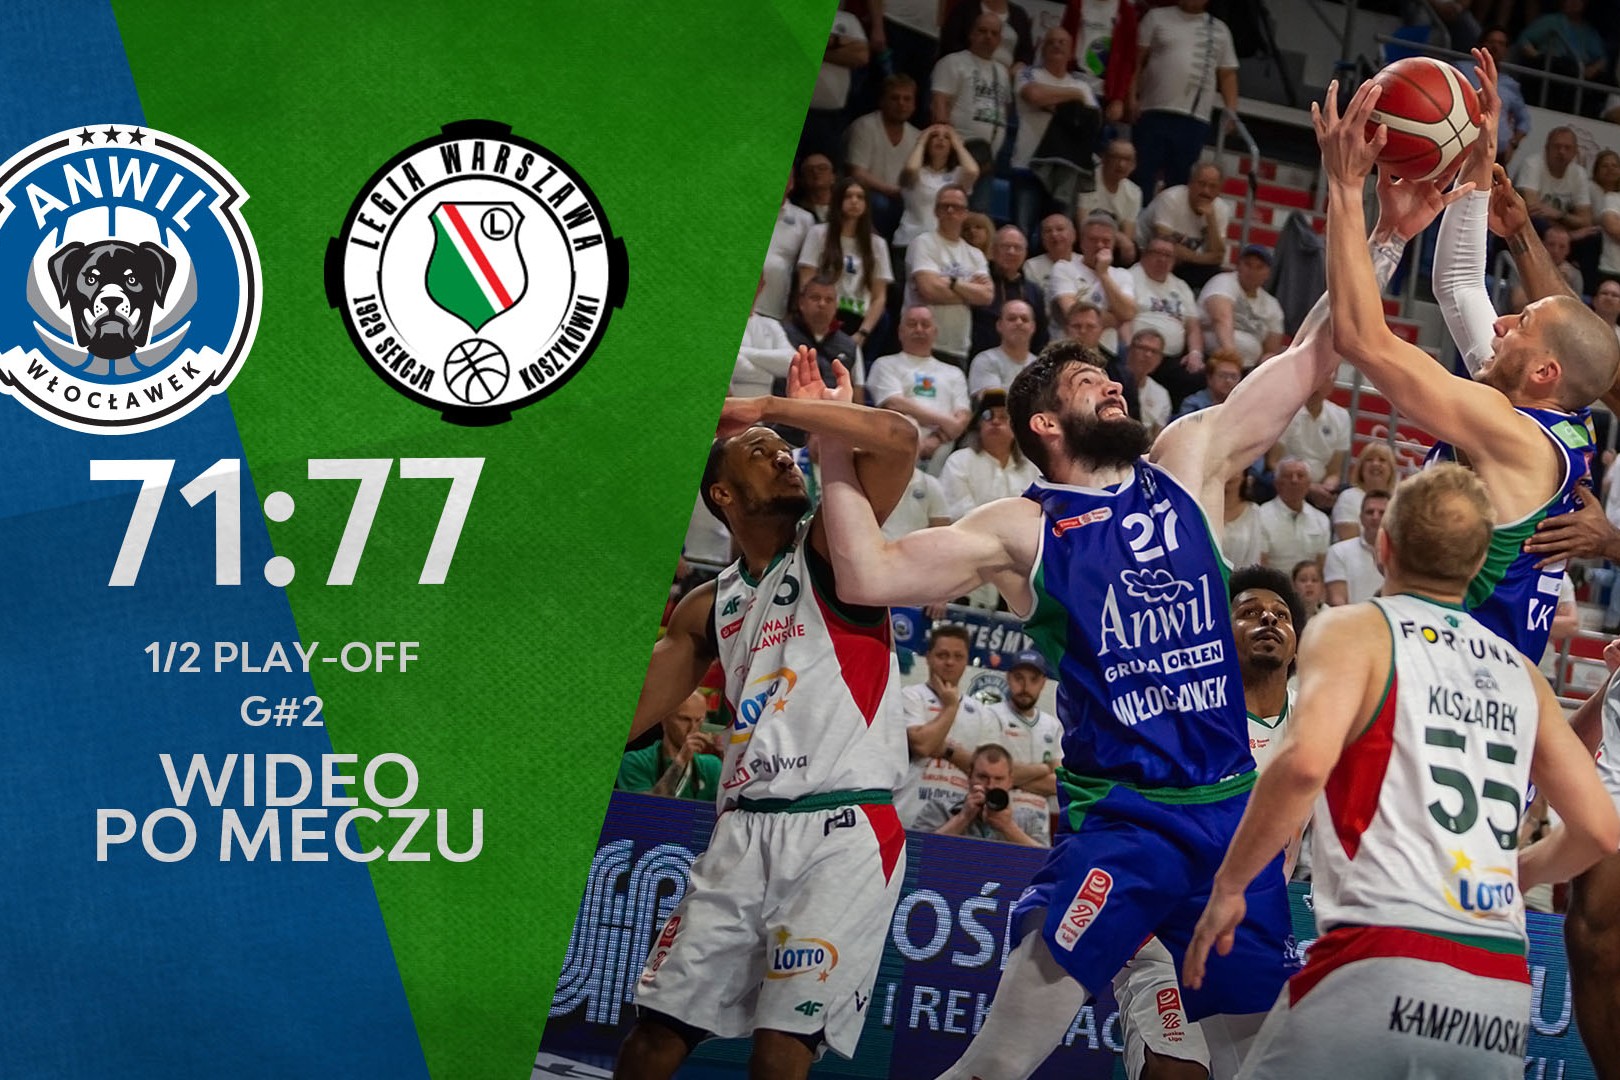 WIDEO | Anwil - Legia 1/2 Play-Off G#2